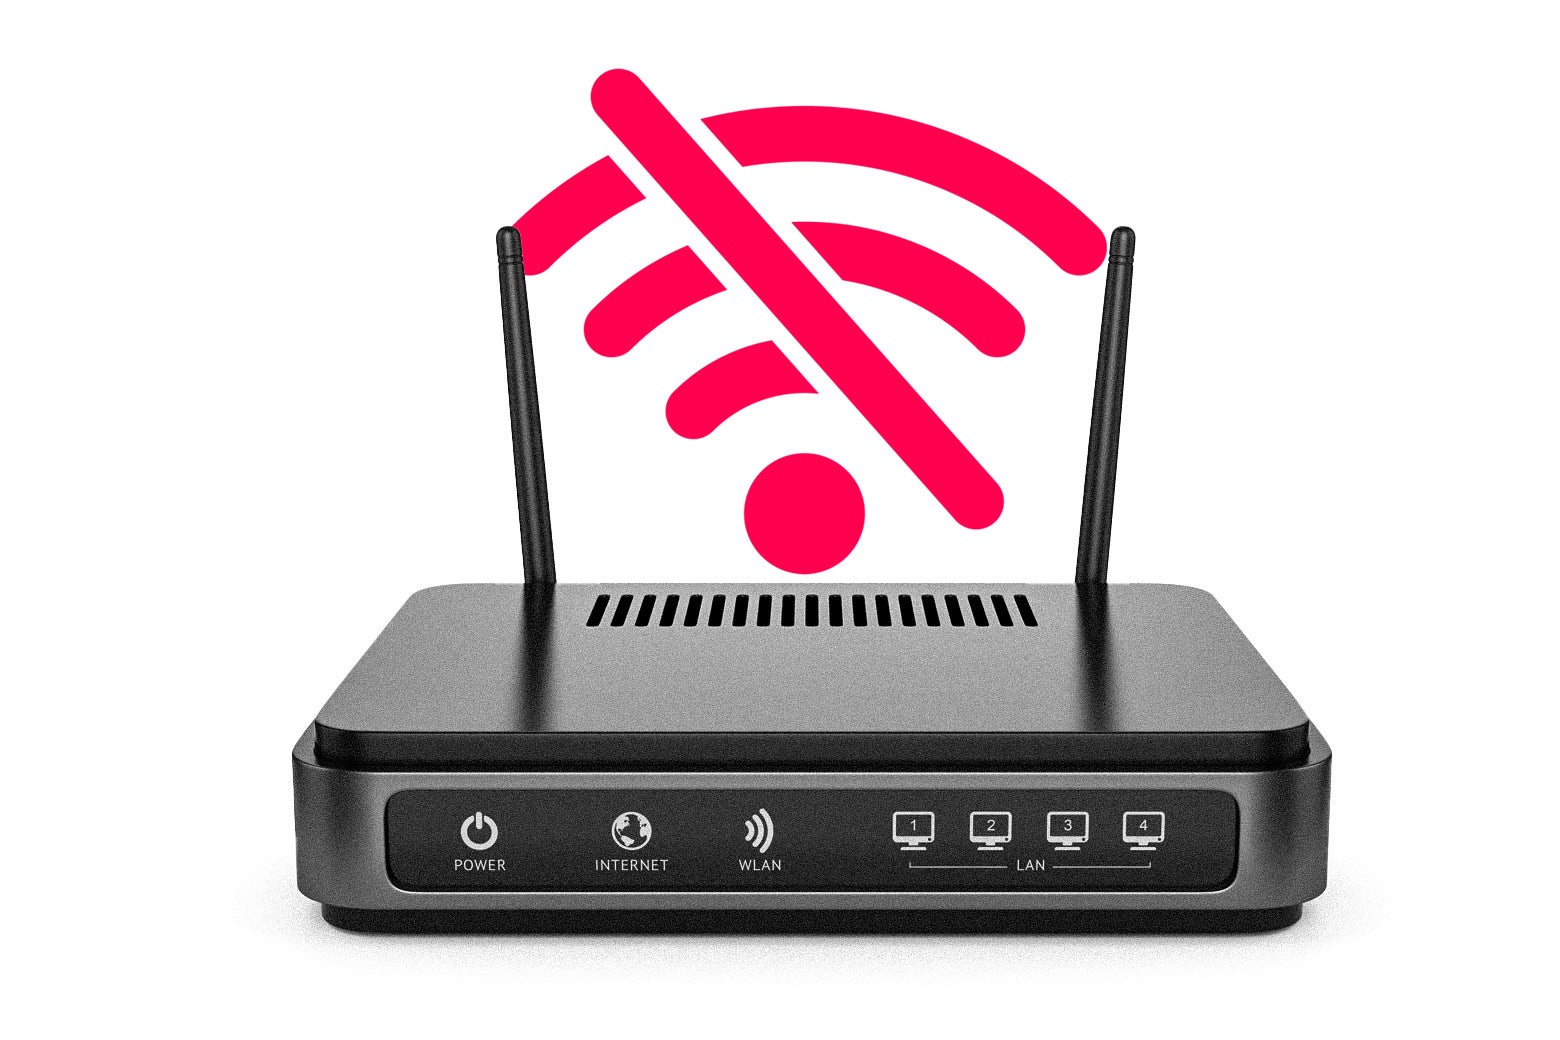 Wi-Fi disconnection icon above a router